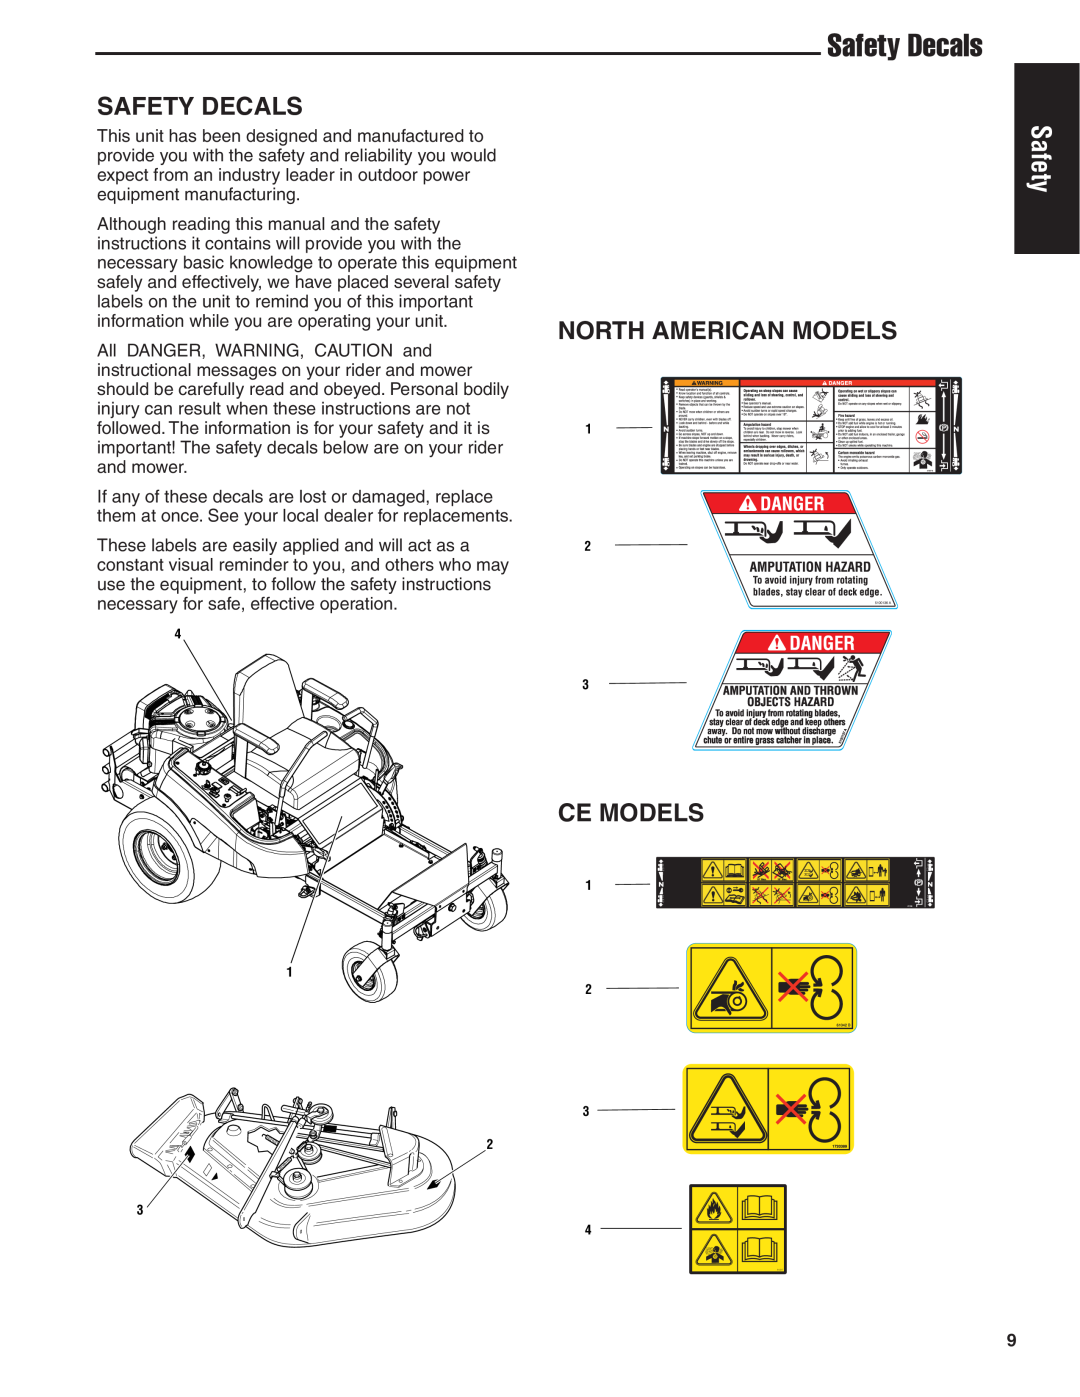 Snapper 20HP, 19HP, 18HP user manual Safety Decals, North American Models, Ce Models 